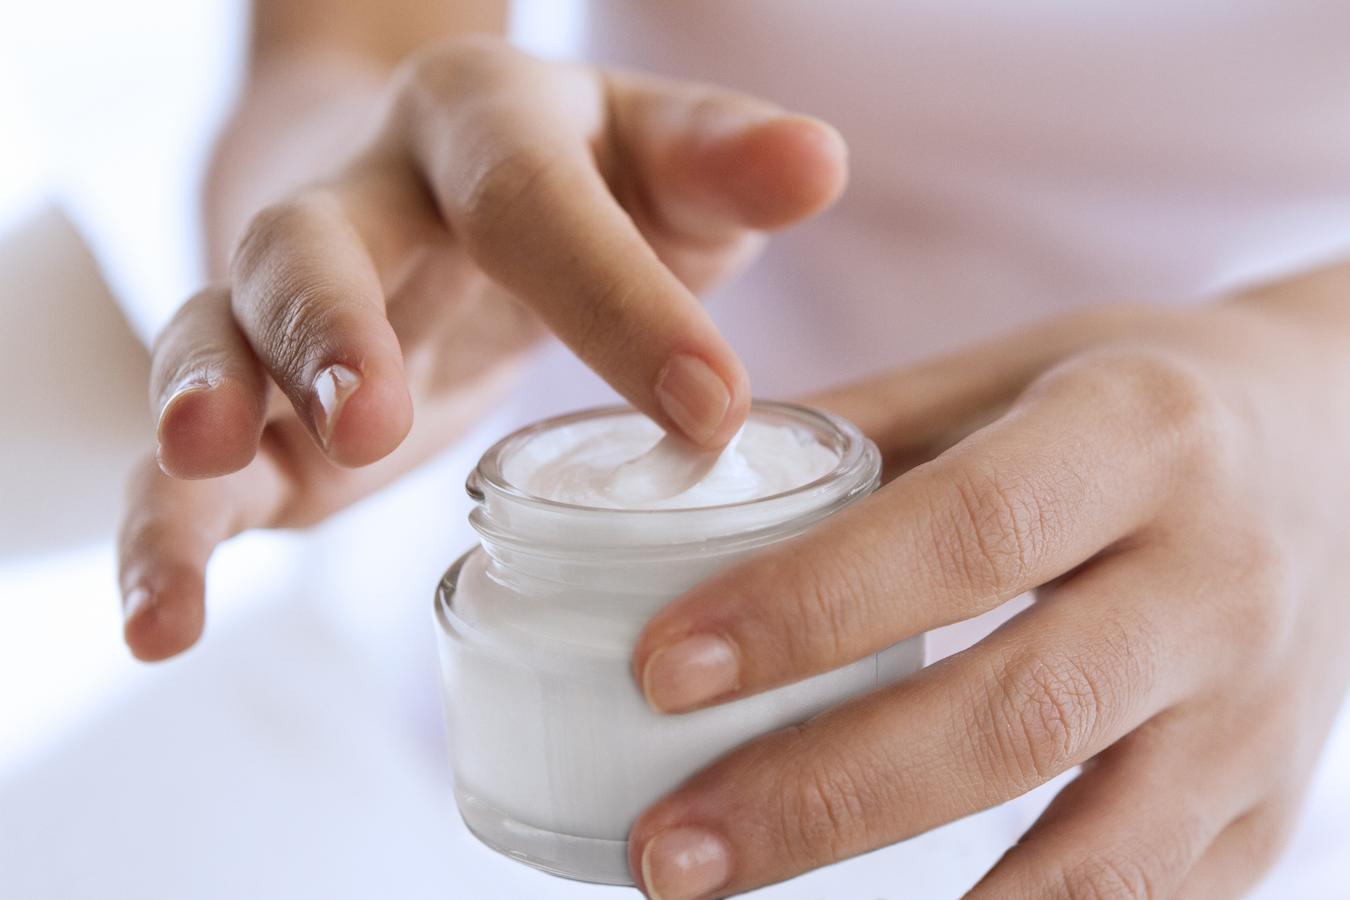 Facial cream helps skin retain moisture stay hydrated and protects skin